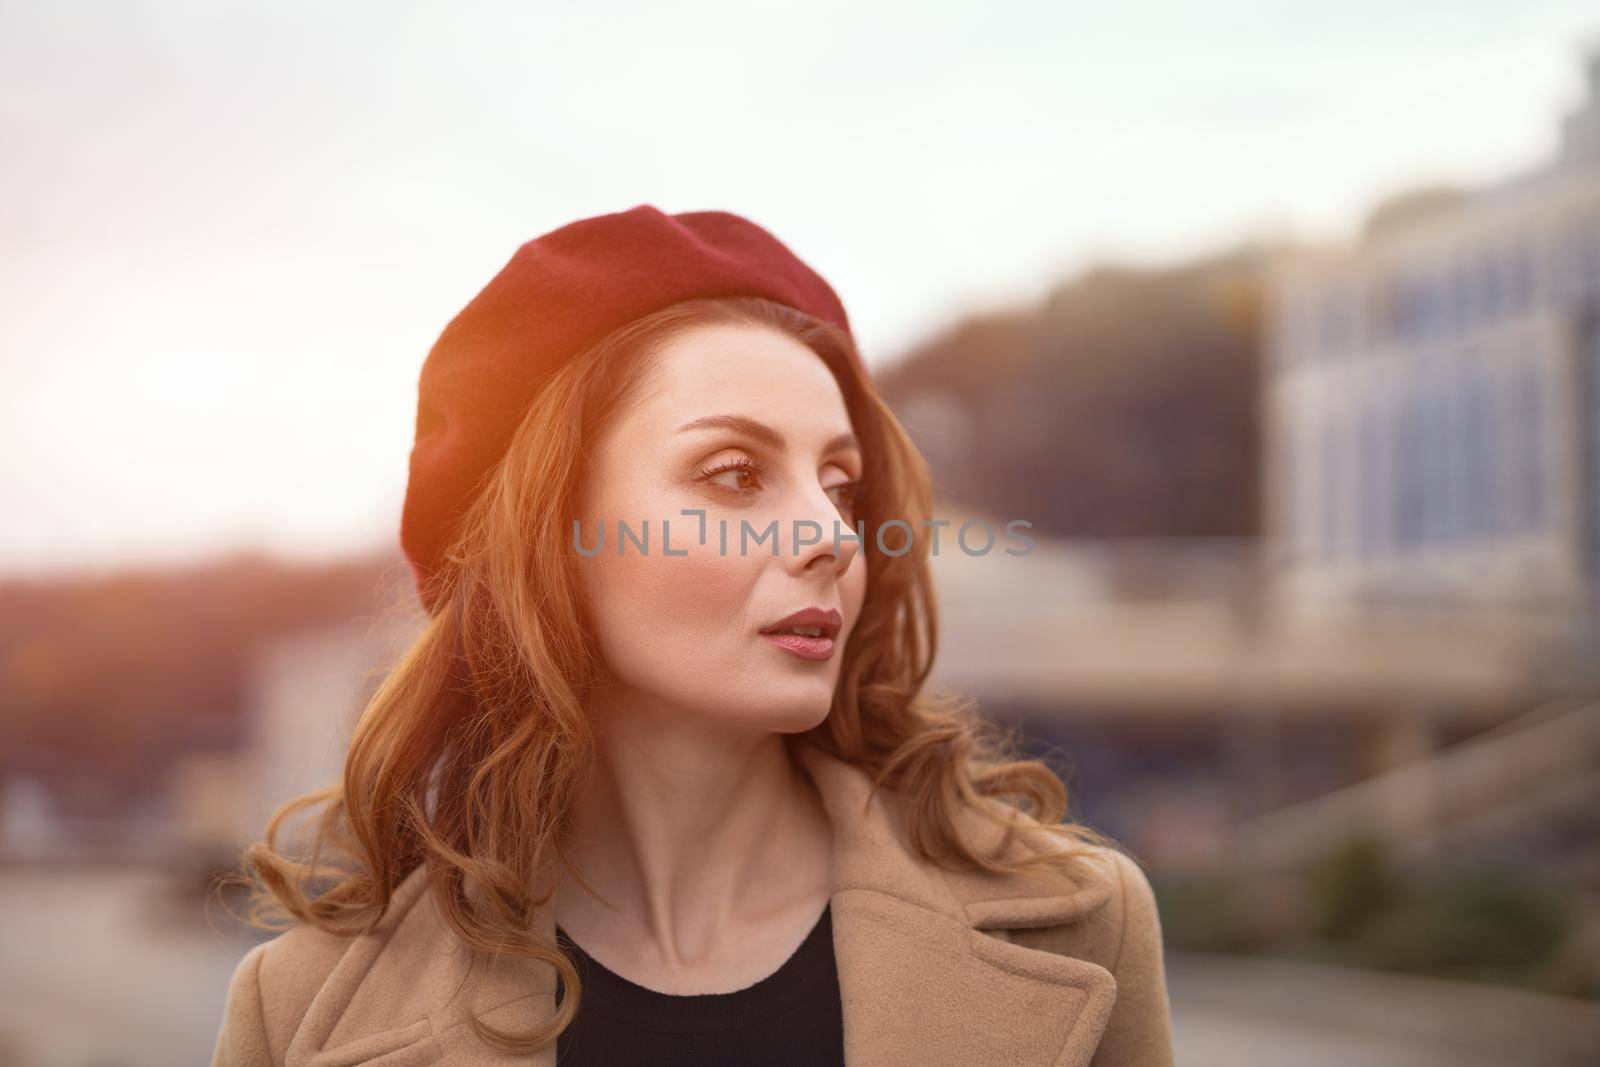 Charming pretty french woman in an autumn beige coat and red beret standing outdoors with urban city background. Tinted photo. 